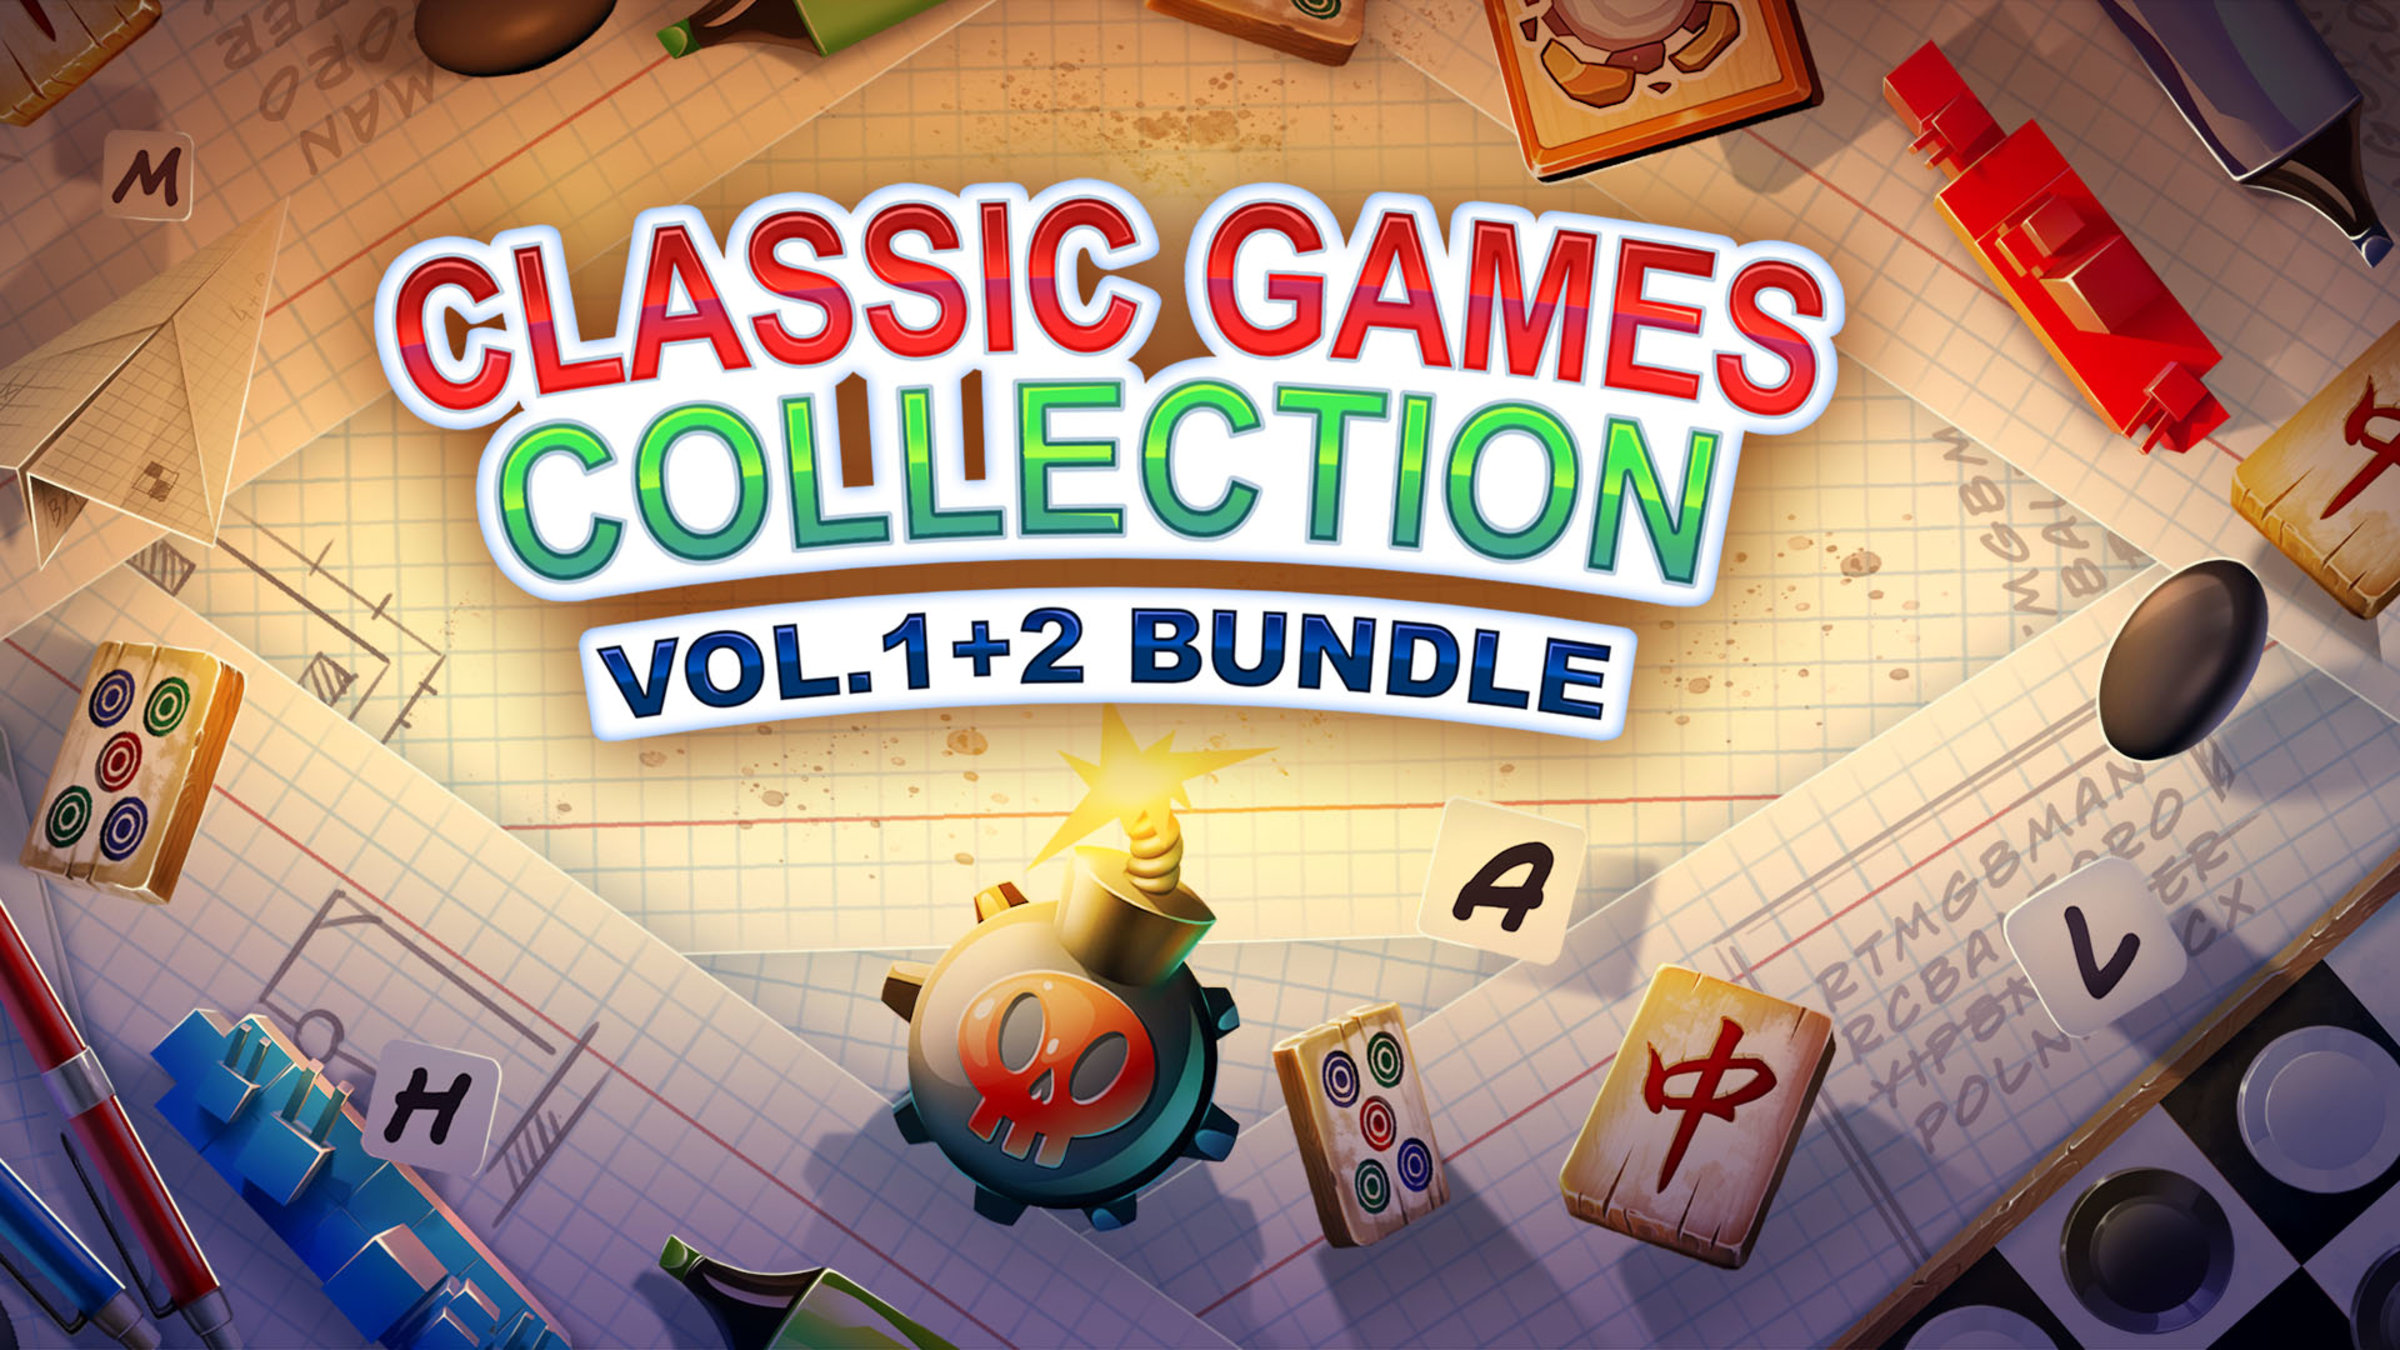 Classic Games Collection Vol.1+2 Bundle for Nintendo Switch